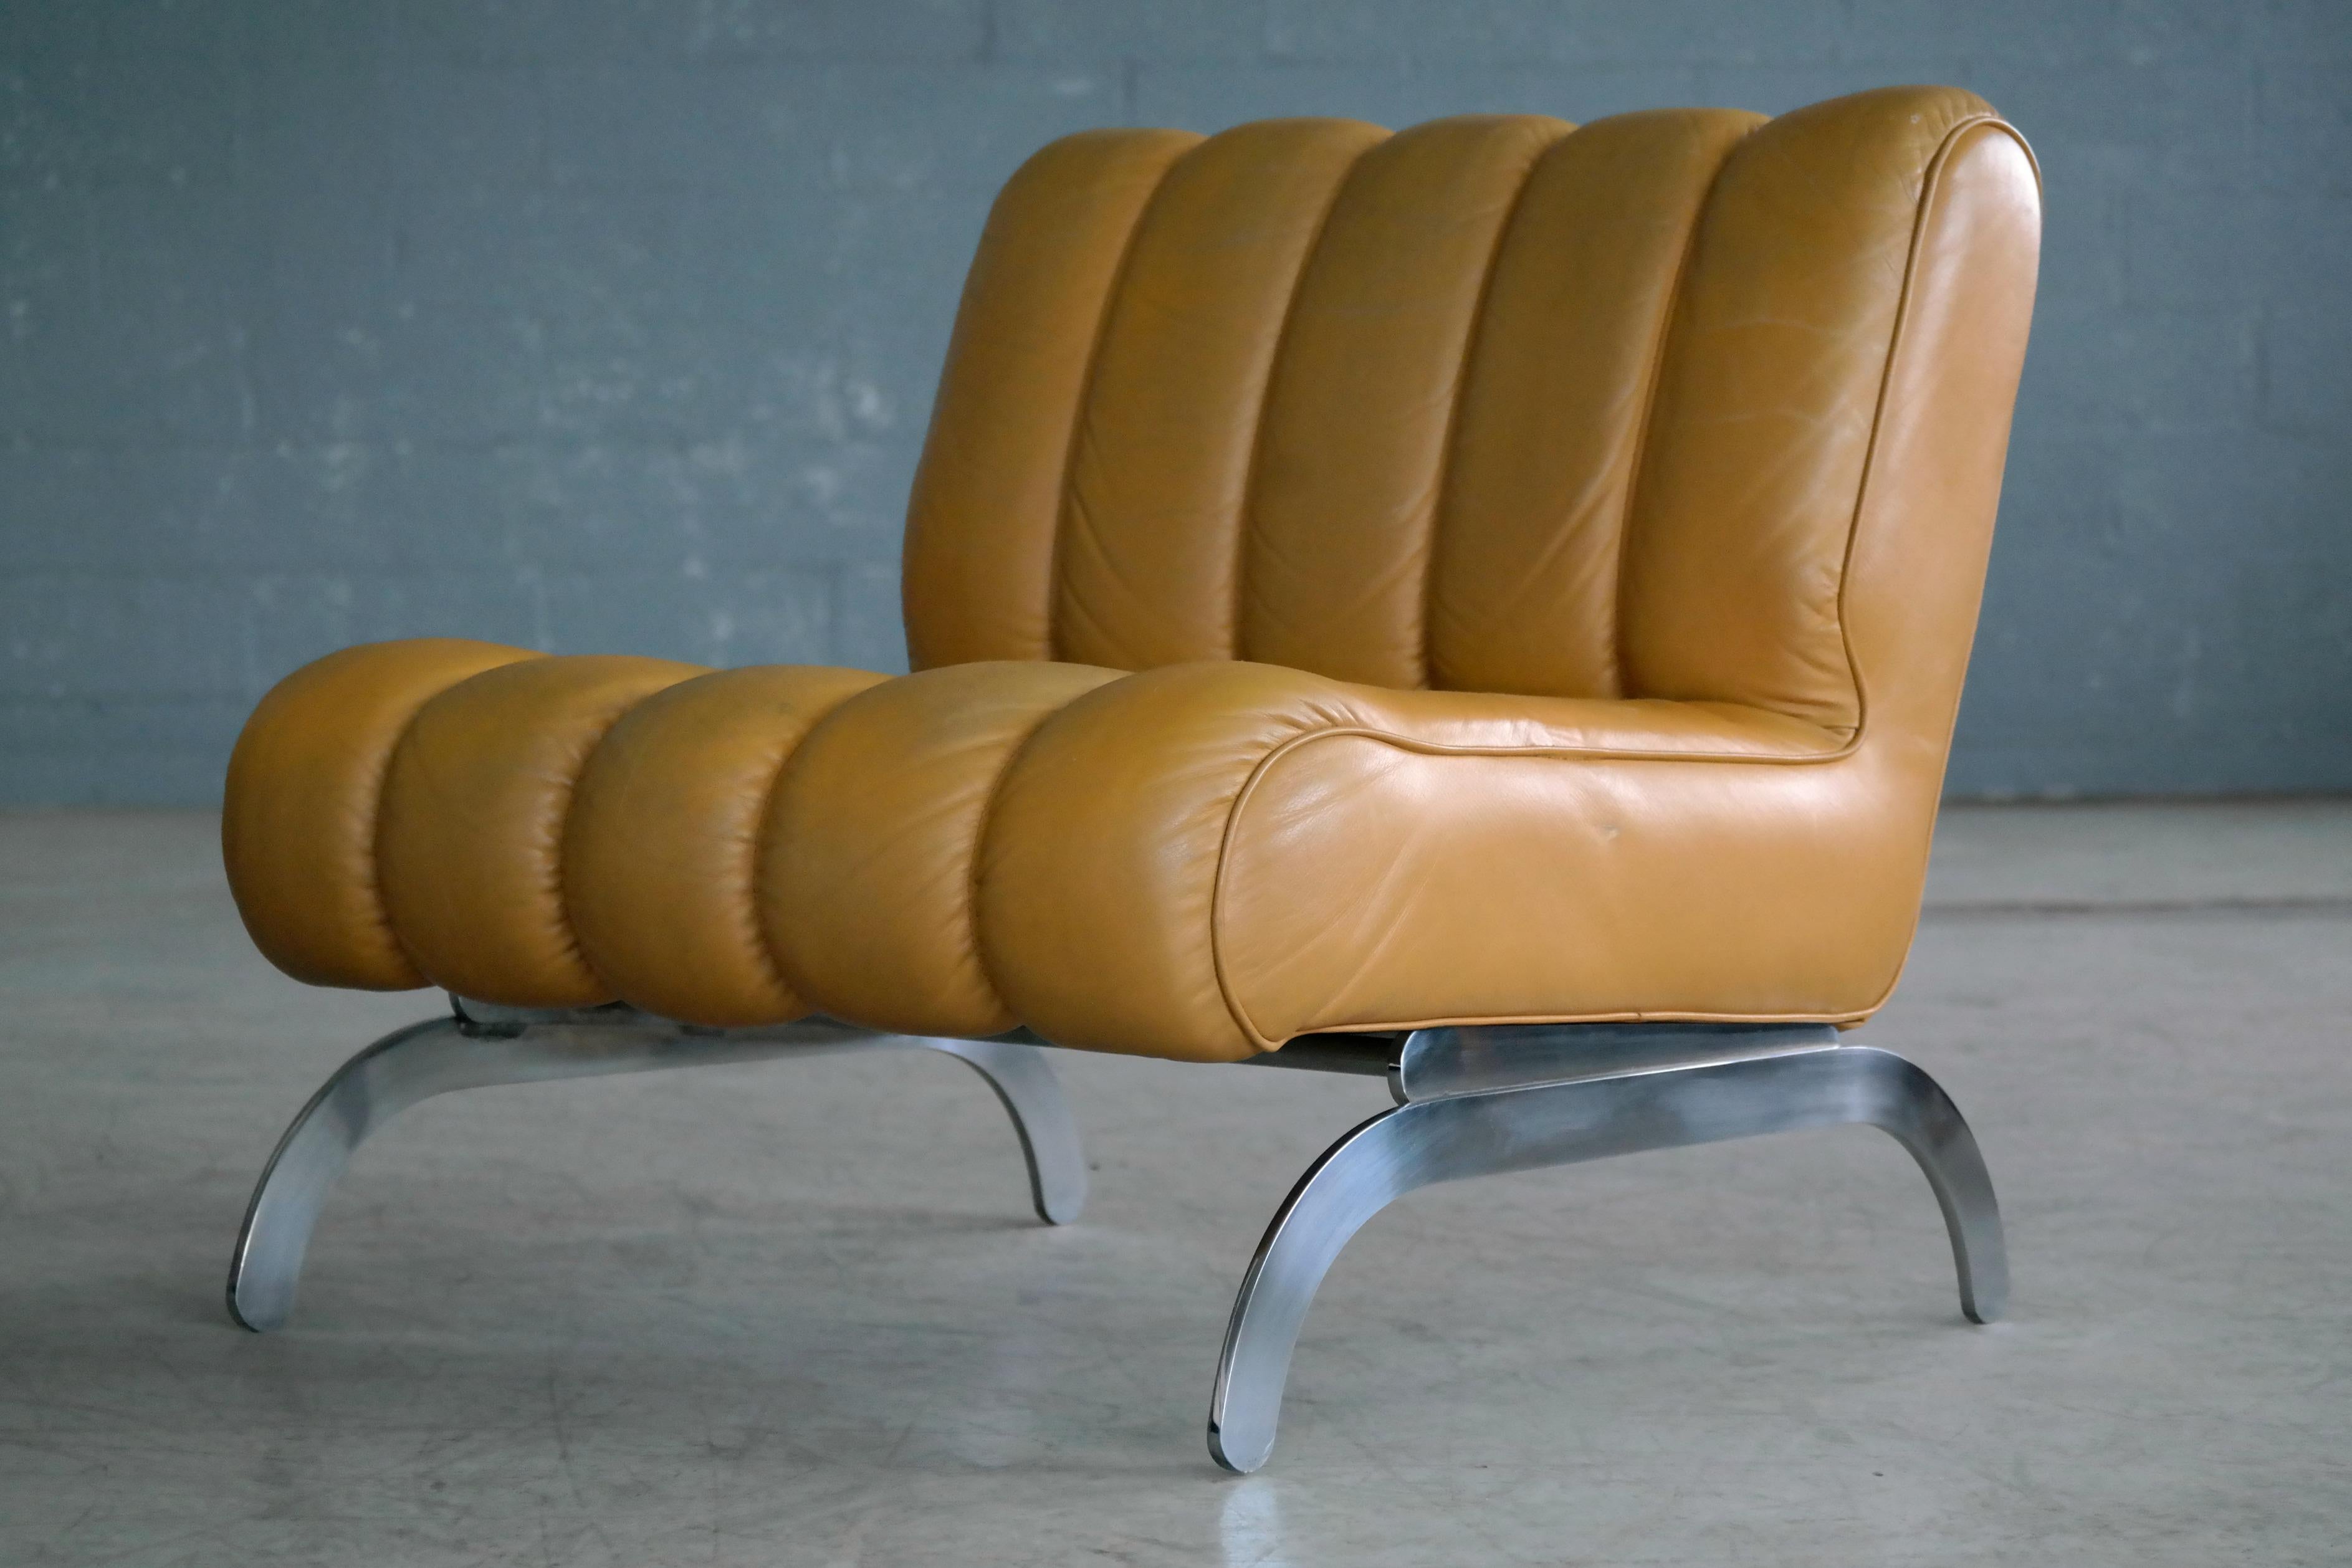 Mid-Century Modern Midcentury Independence Lounge Chair in Mustard Yellow Leather by Karl Wittmann